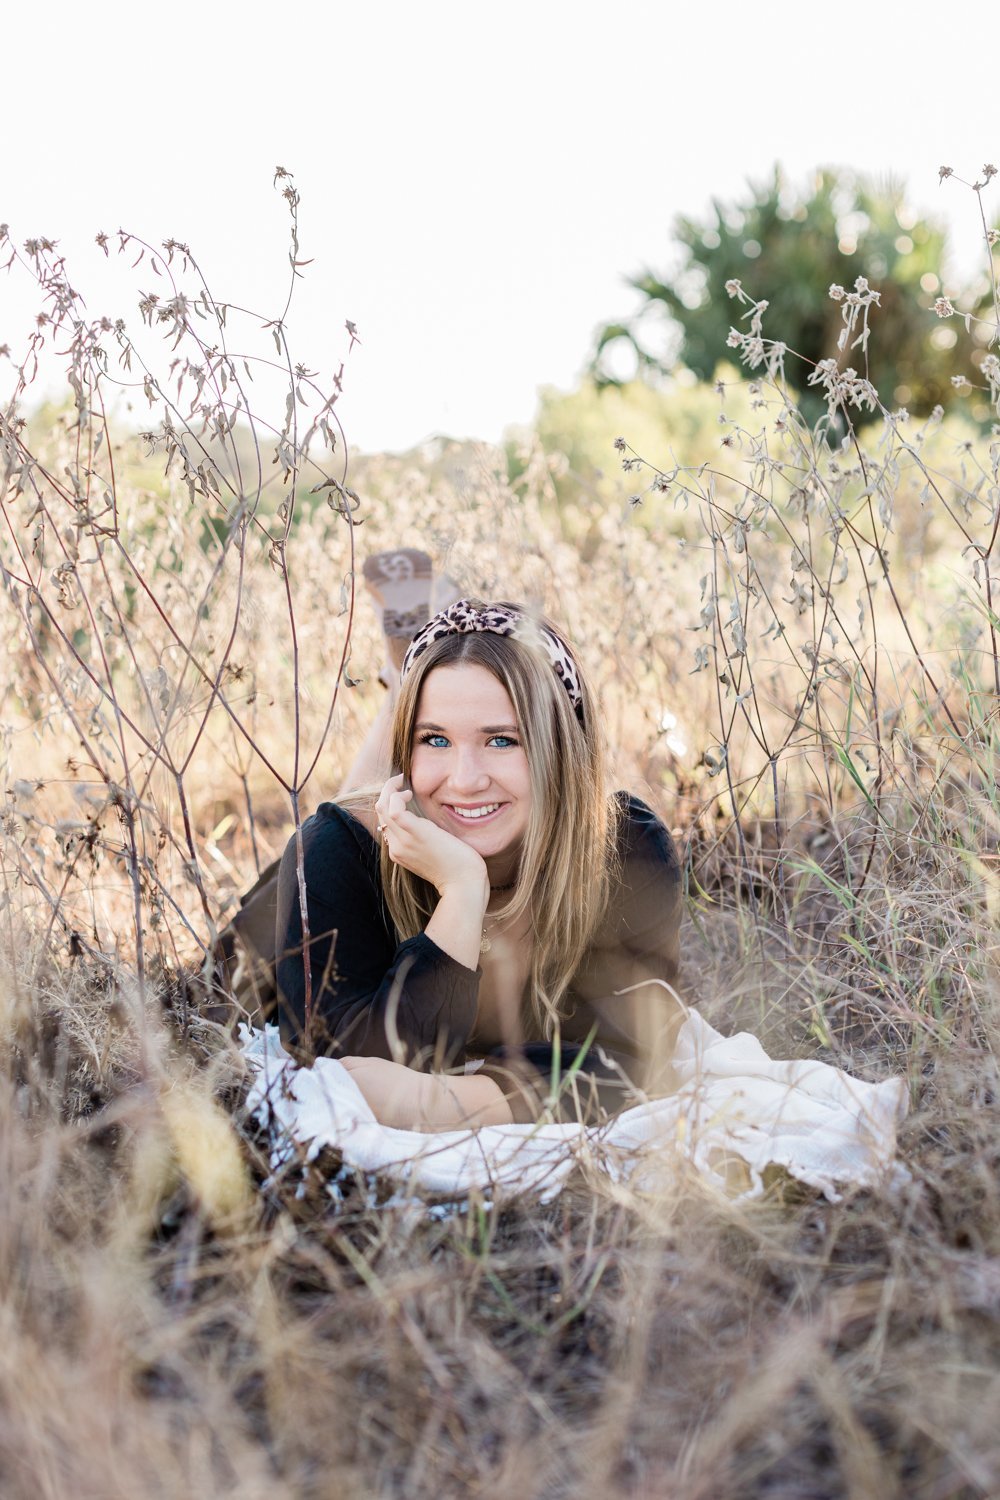 Fall senior picture and posing ideas in the grassy field near Ponte Vedra, FL